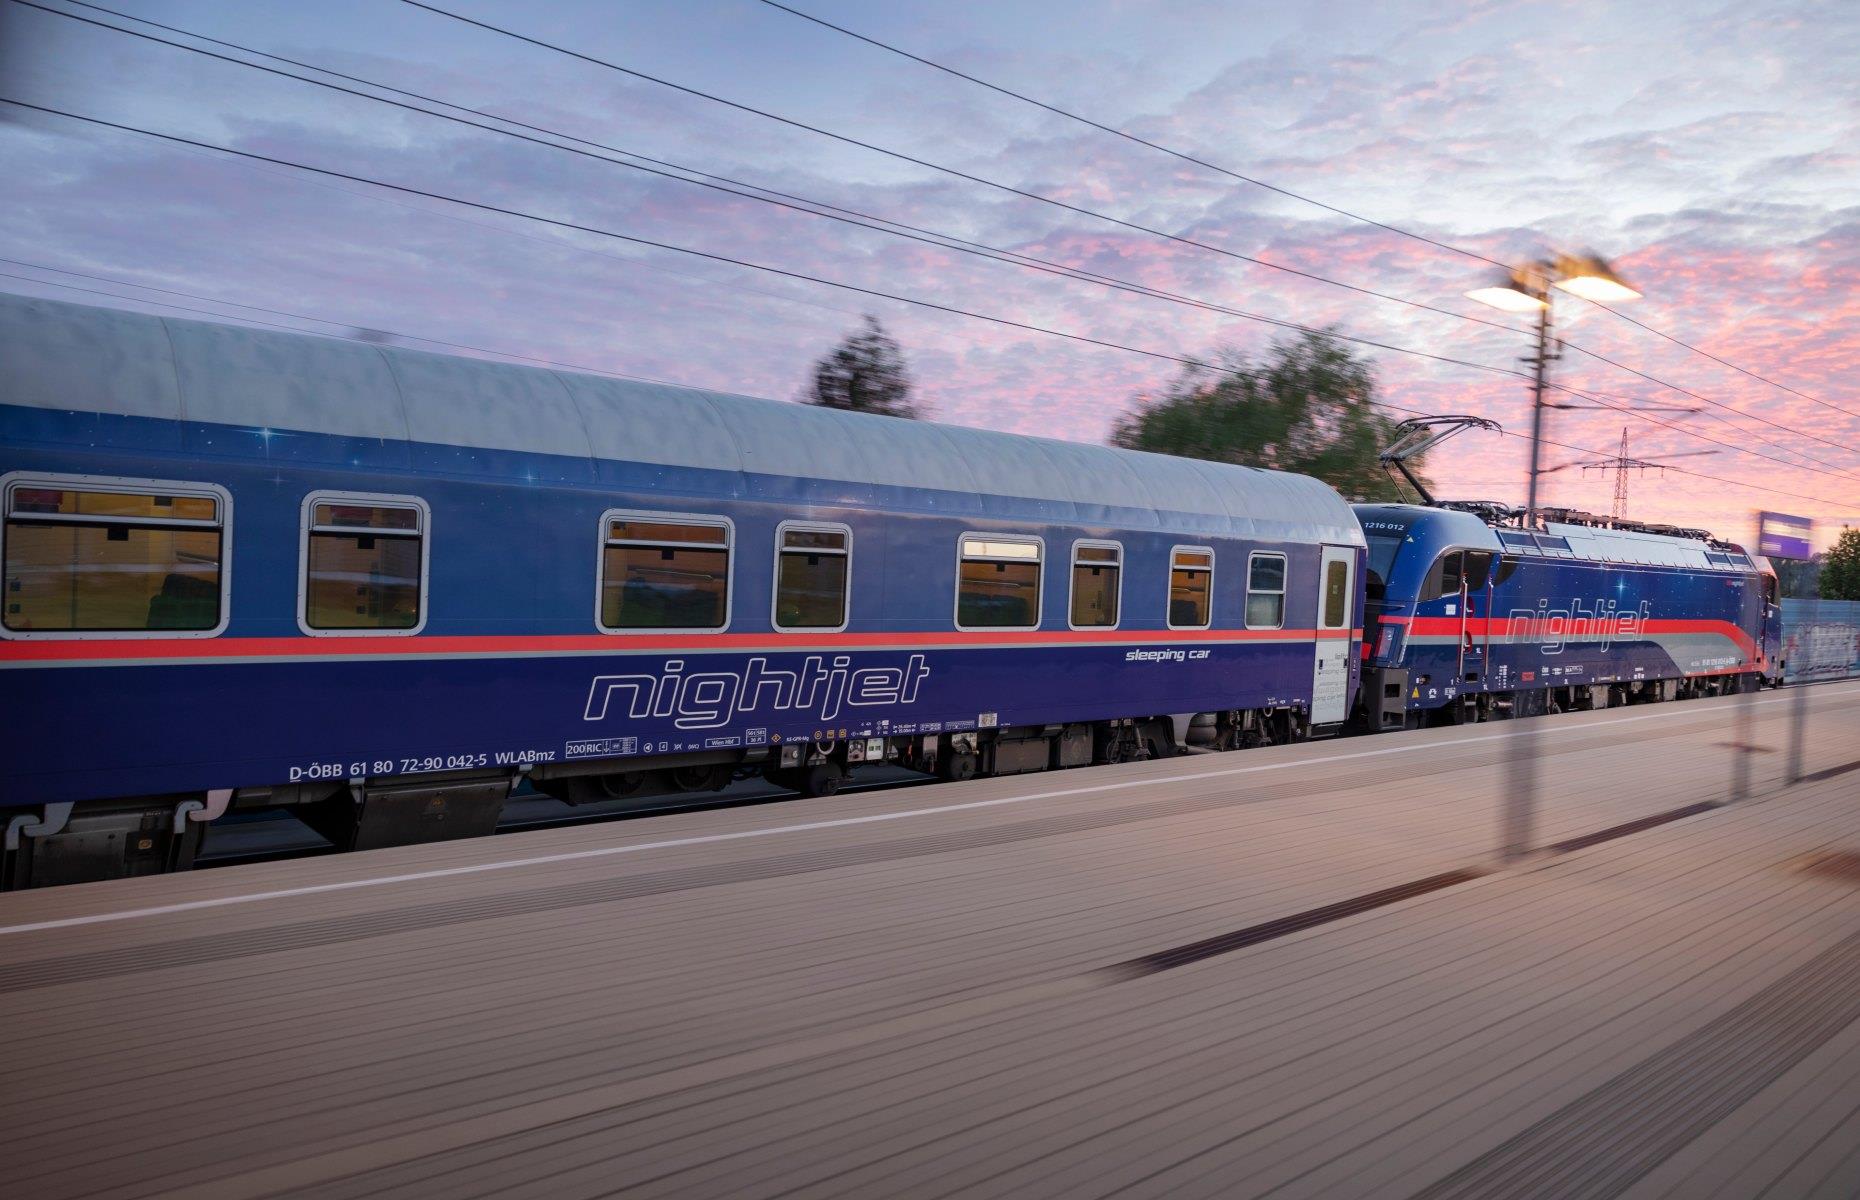 <p>OBB’s signature overnight trains came onto the European sleeper circuit back in 2016, and they’ve been going from strength to strength ever since. 2023 is set to be a landmark year for <a href="https://www.nightjet.com/en/#/home">Nightjet</a>, with a fleet of brand-new modern trains entering service from summer onwards, offering everything from wireless charging stations and ambient lighting to private en-suite sleeper compartments, solo snoozing pods and bike storage. Not only that, but the operator’s revamped 2023 timetable has opened up a slew of new possibilities for rail travelers in Europe.</p>